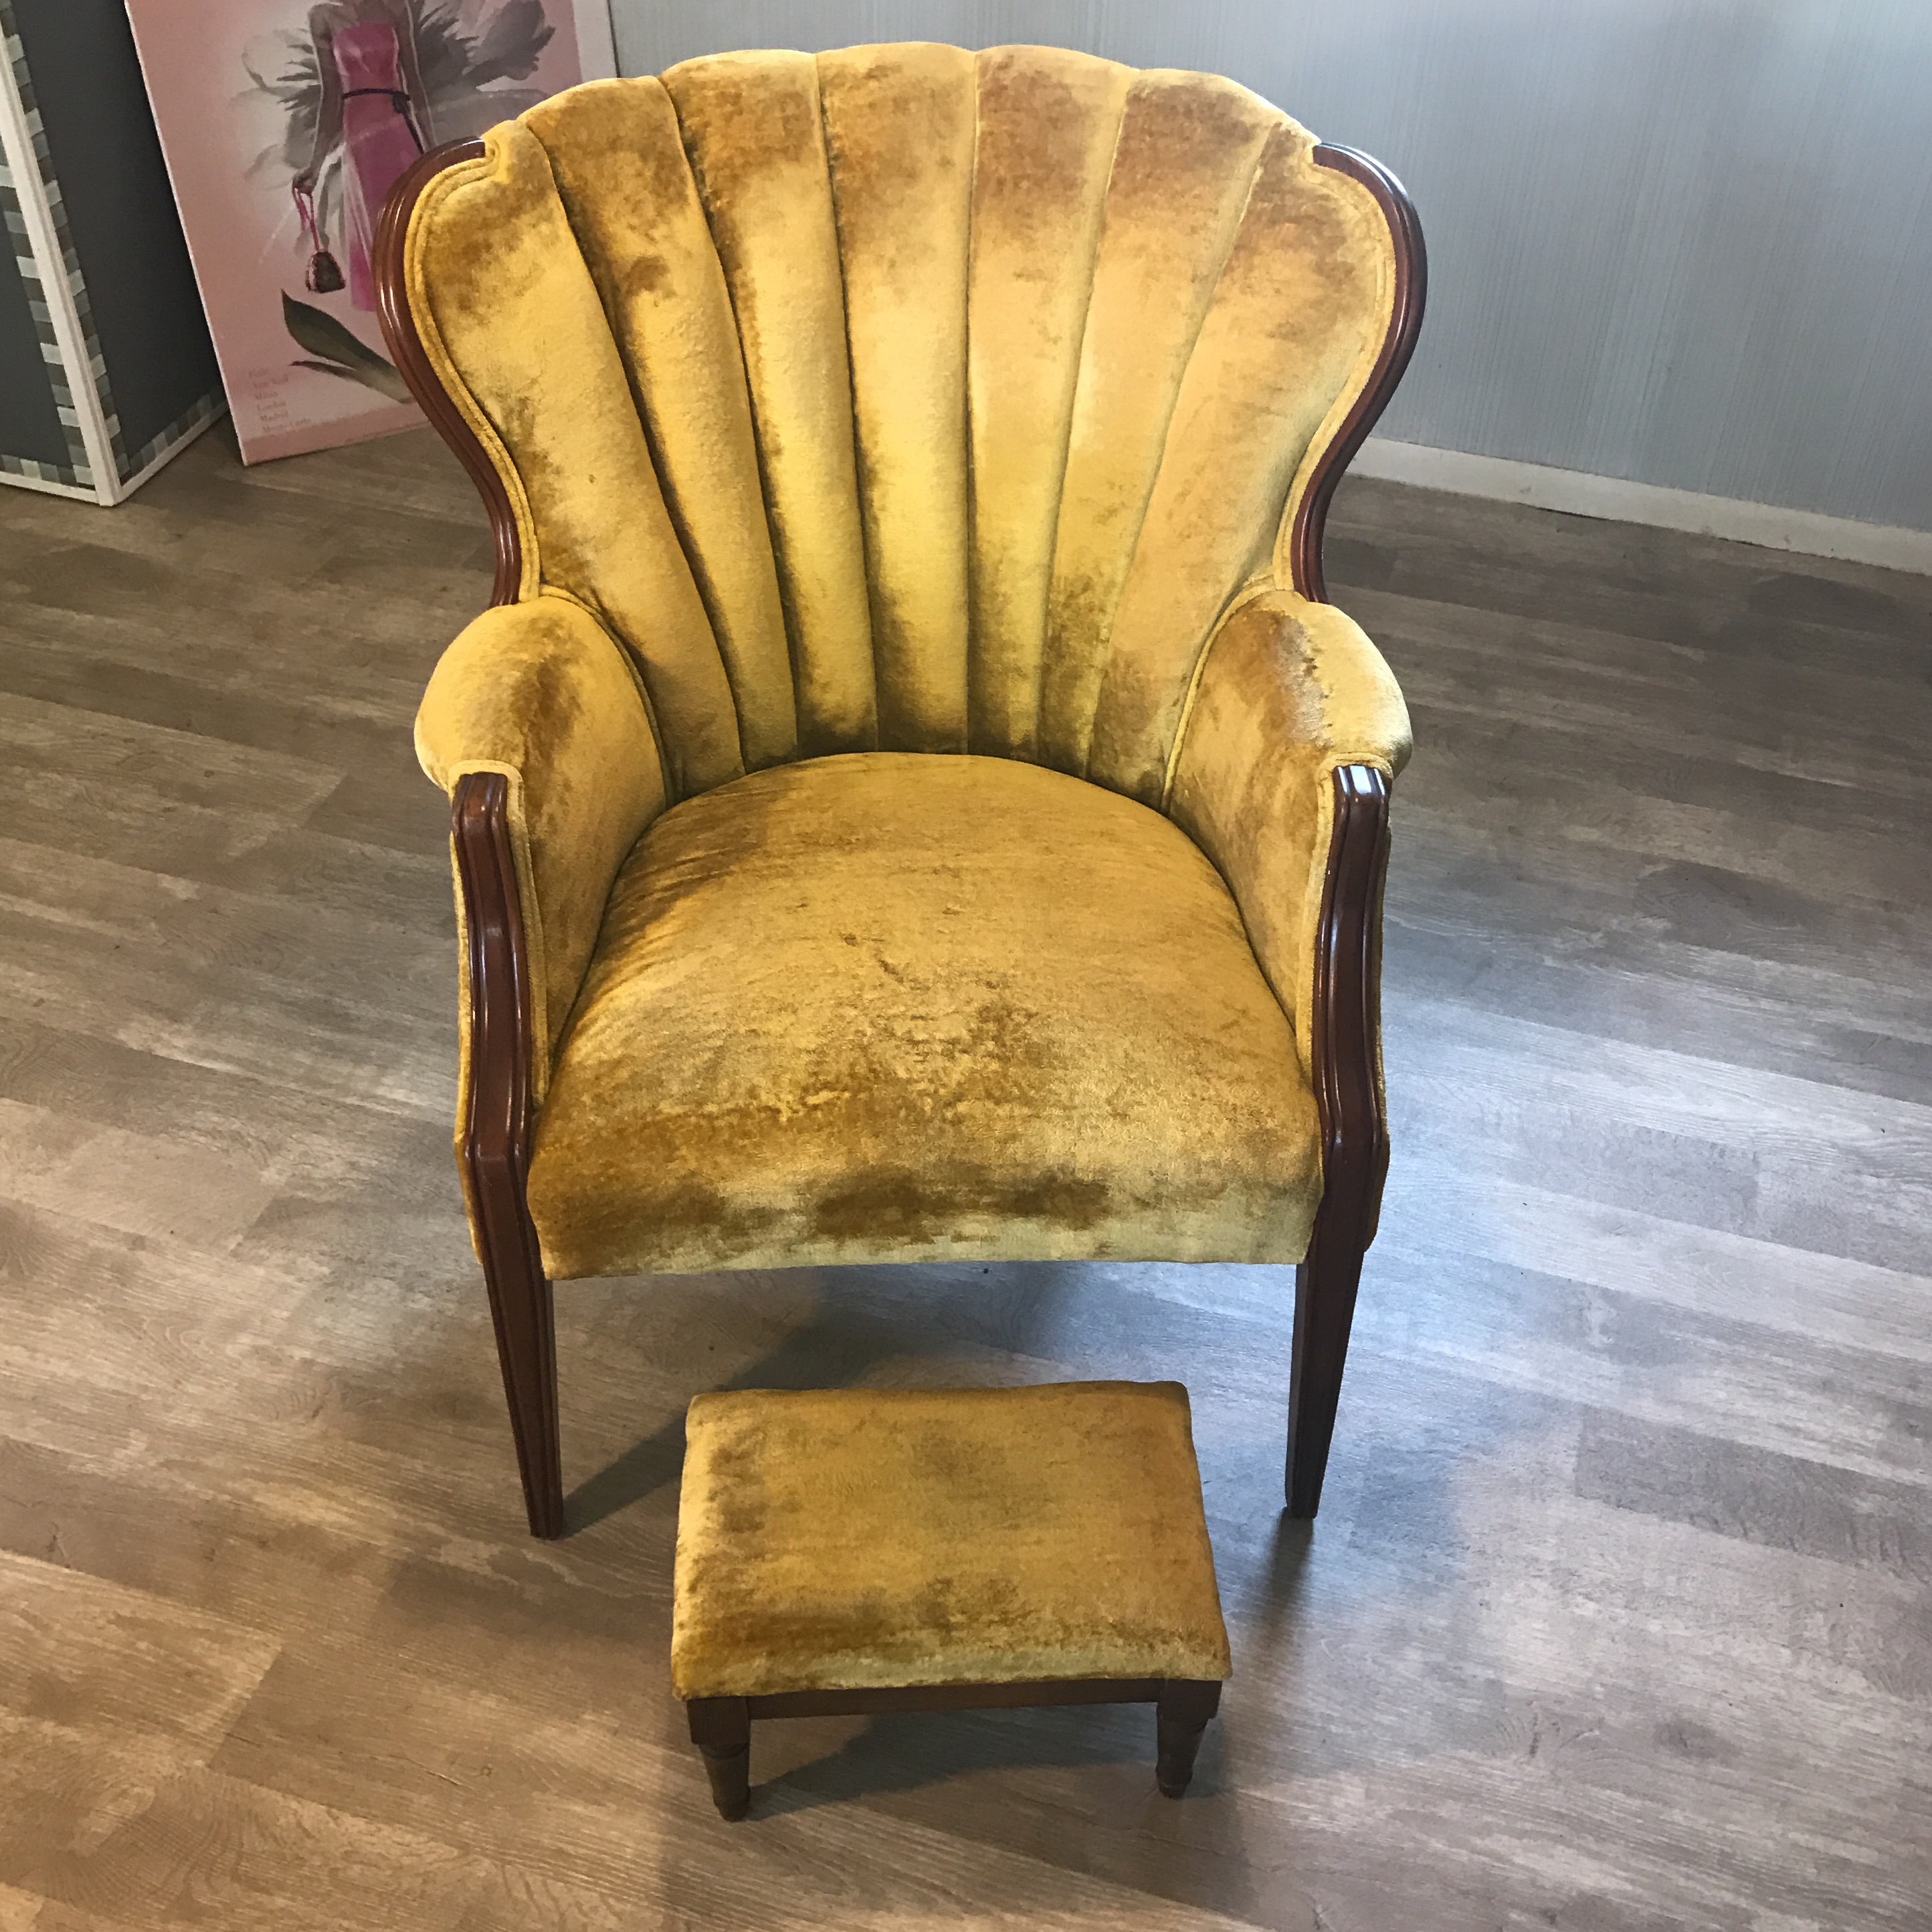 Antique 1920s Crushed Yellow Velvet Arm Chair with Footstool | Chairish